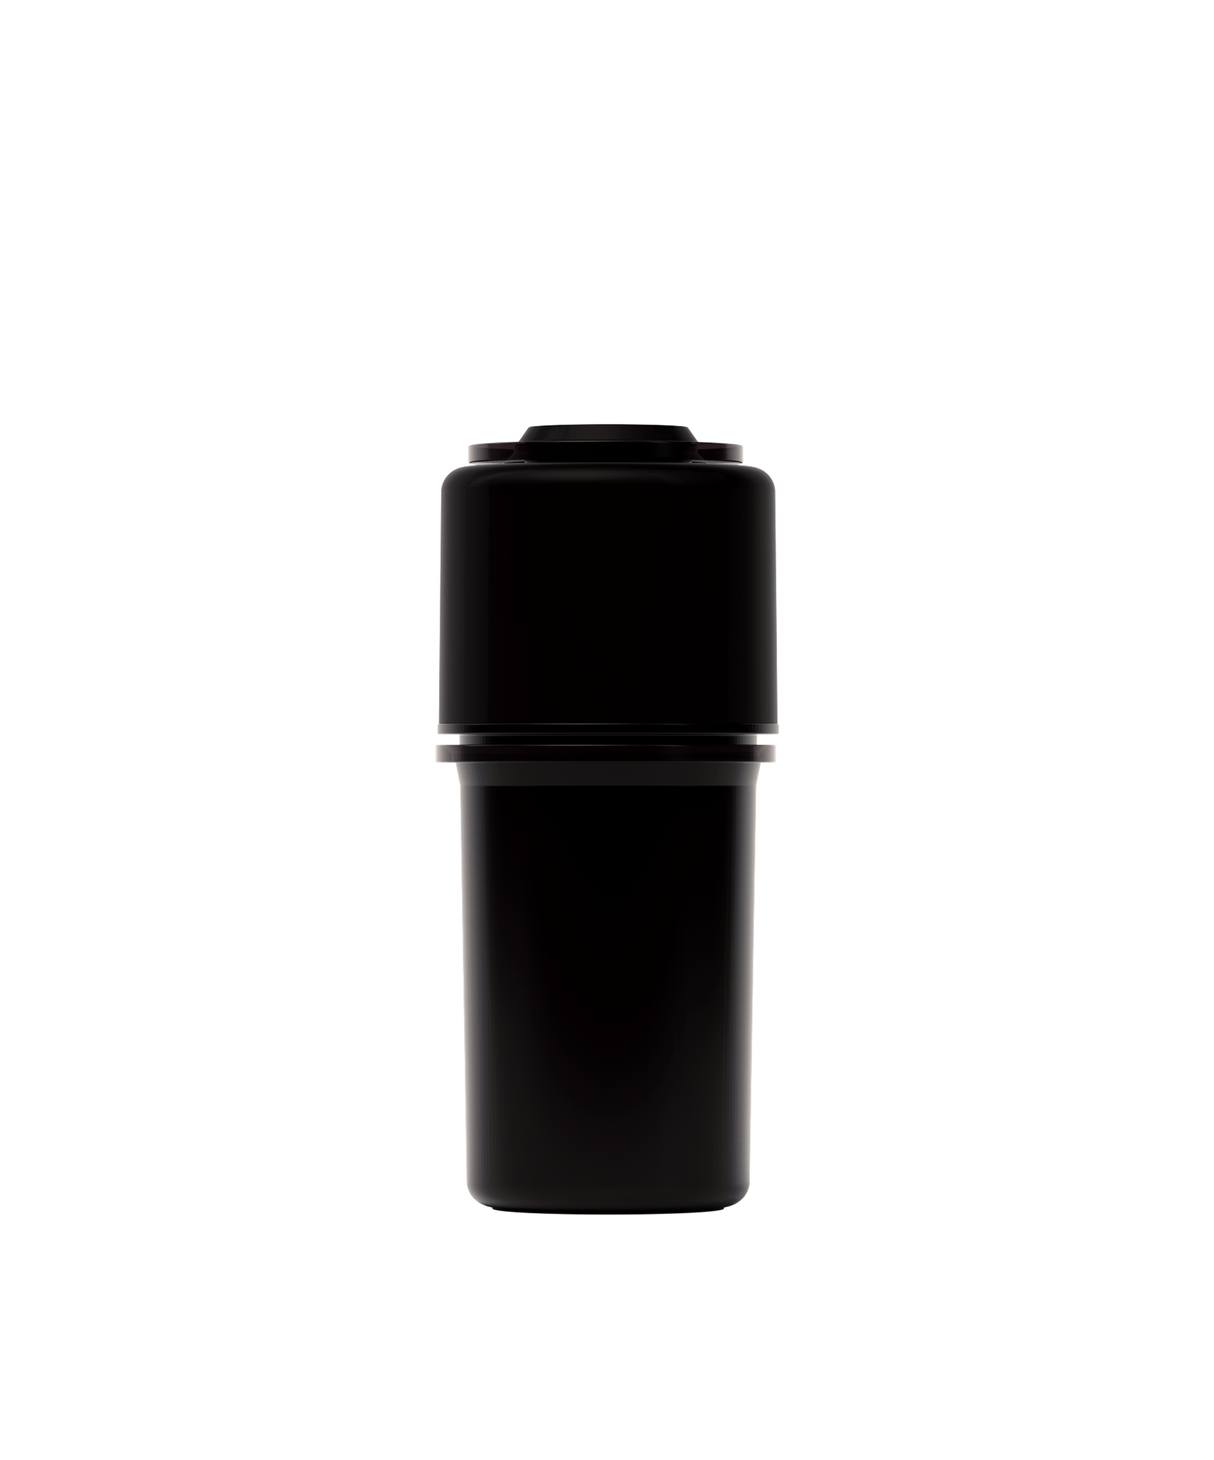 Hemper The Keeper™ 3-Part Grinder in Black - Front View on Seamless White Background